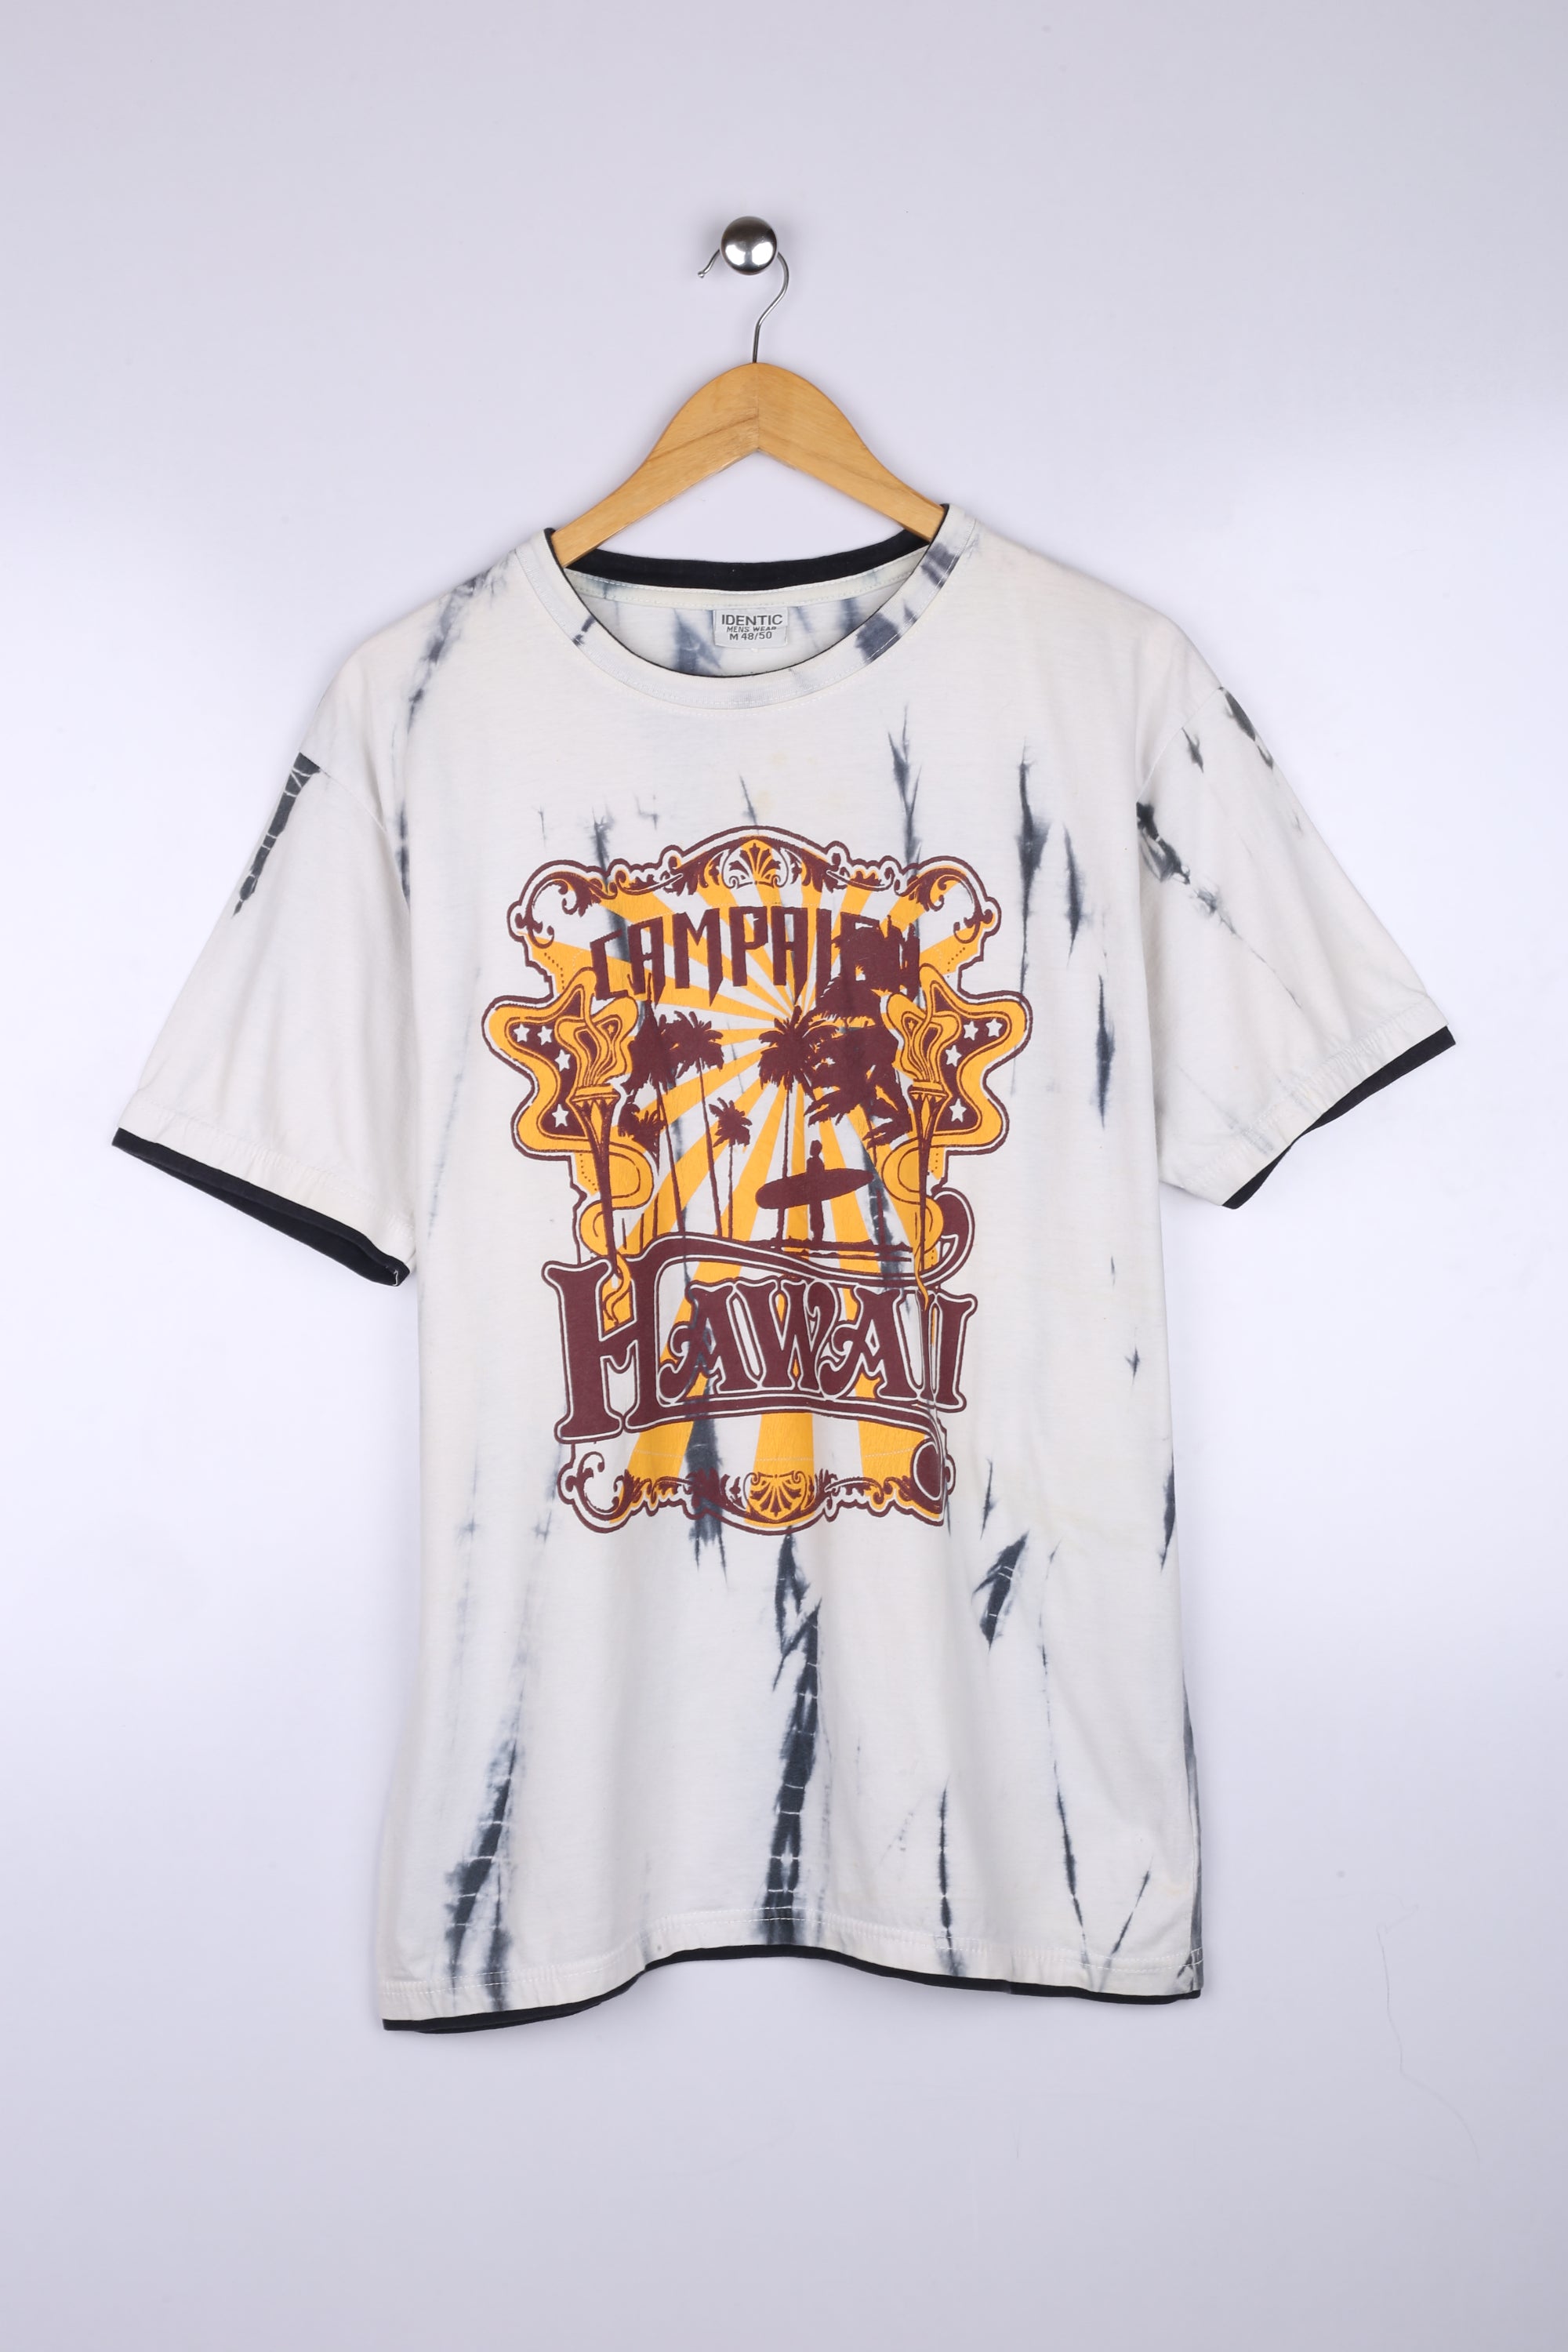 Vintage Campaign Hawaii Graphic Tee White Large